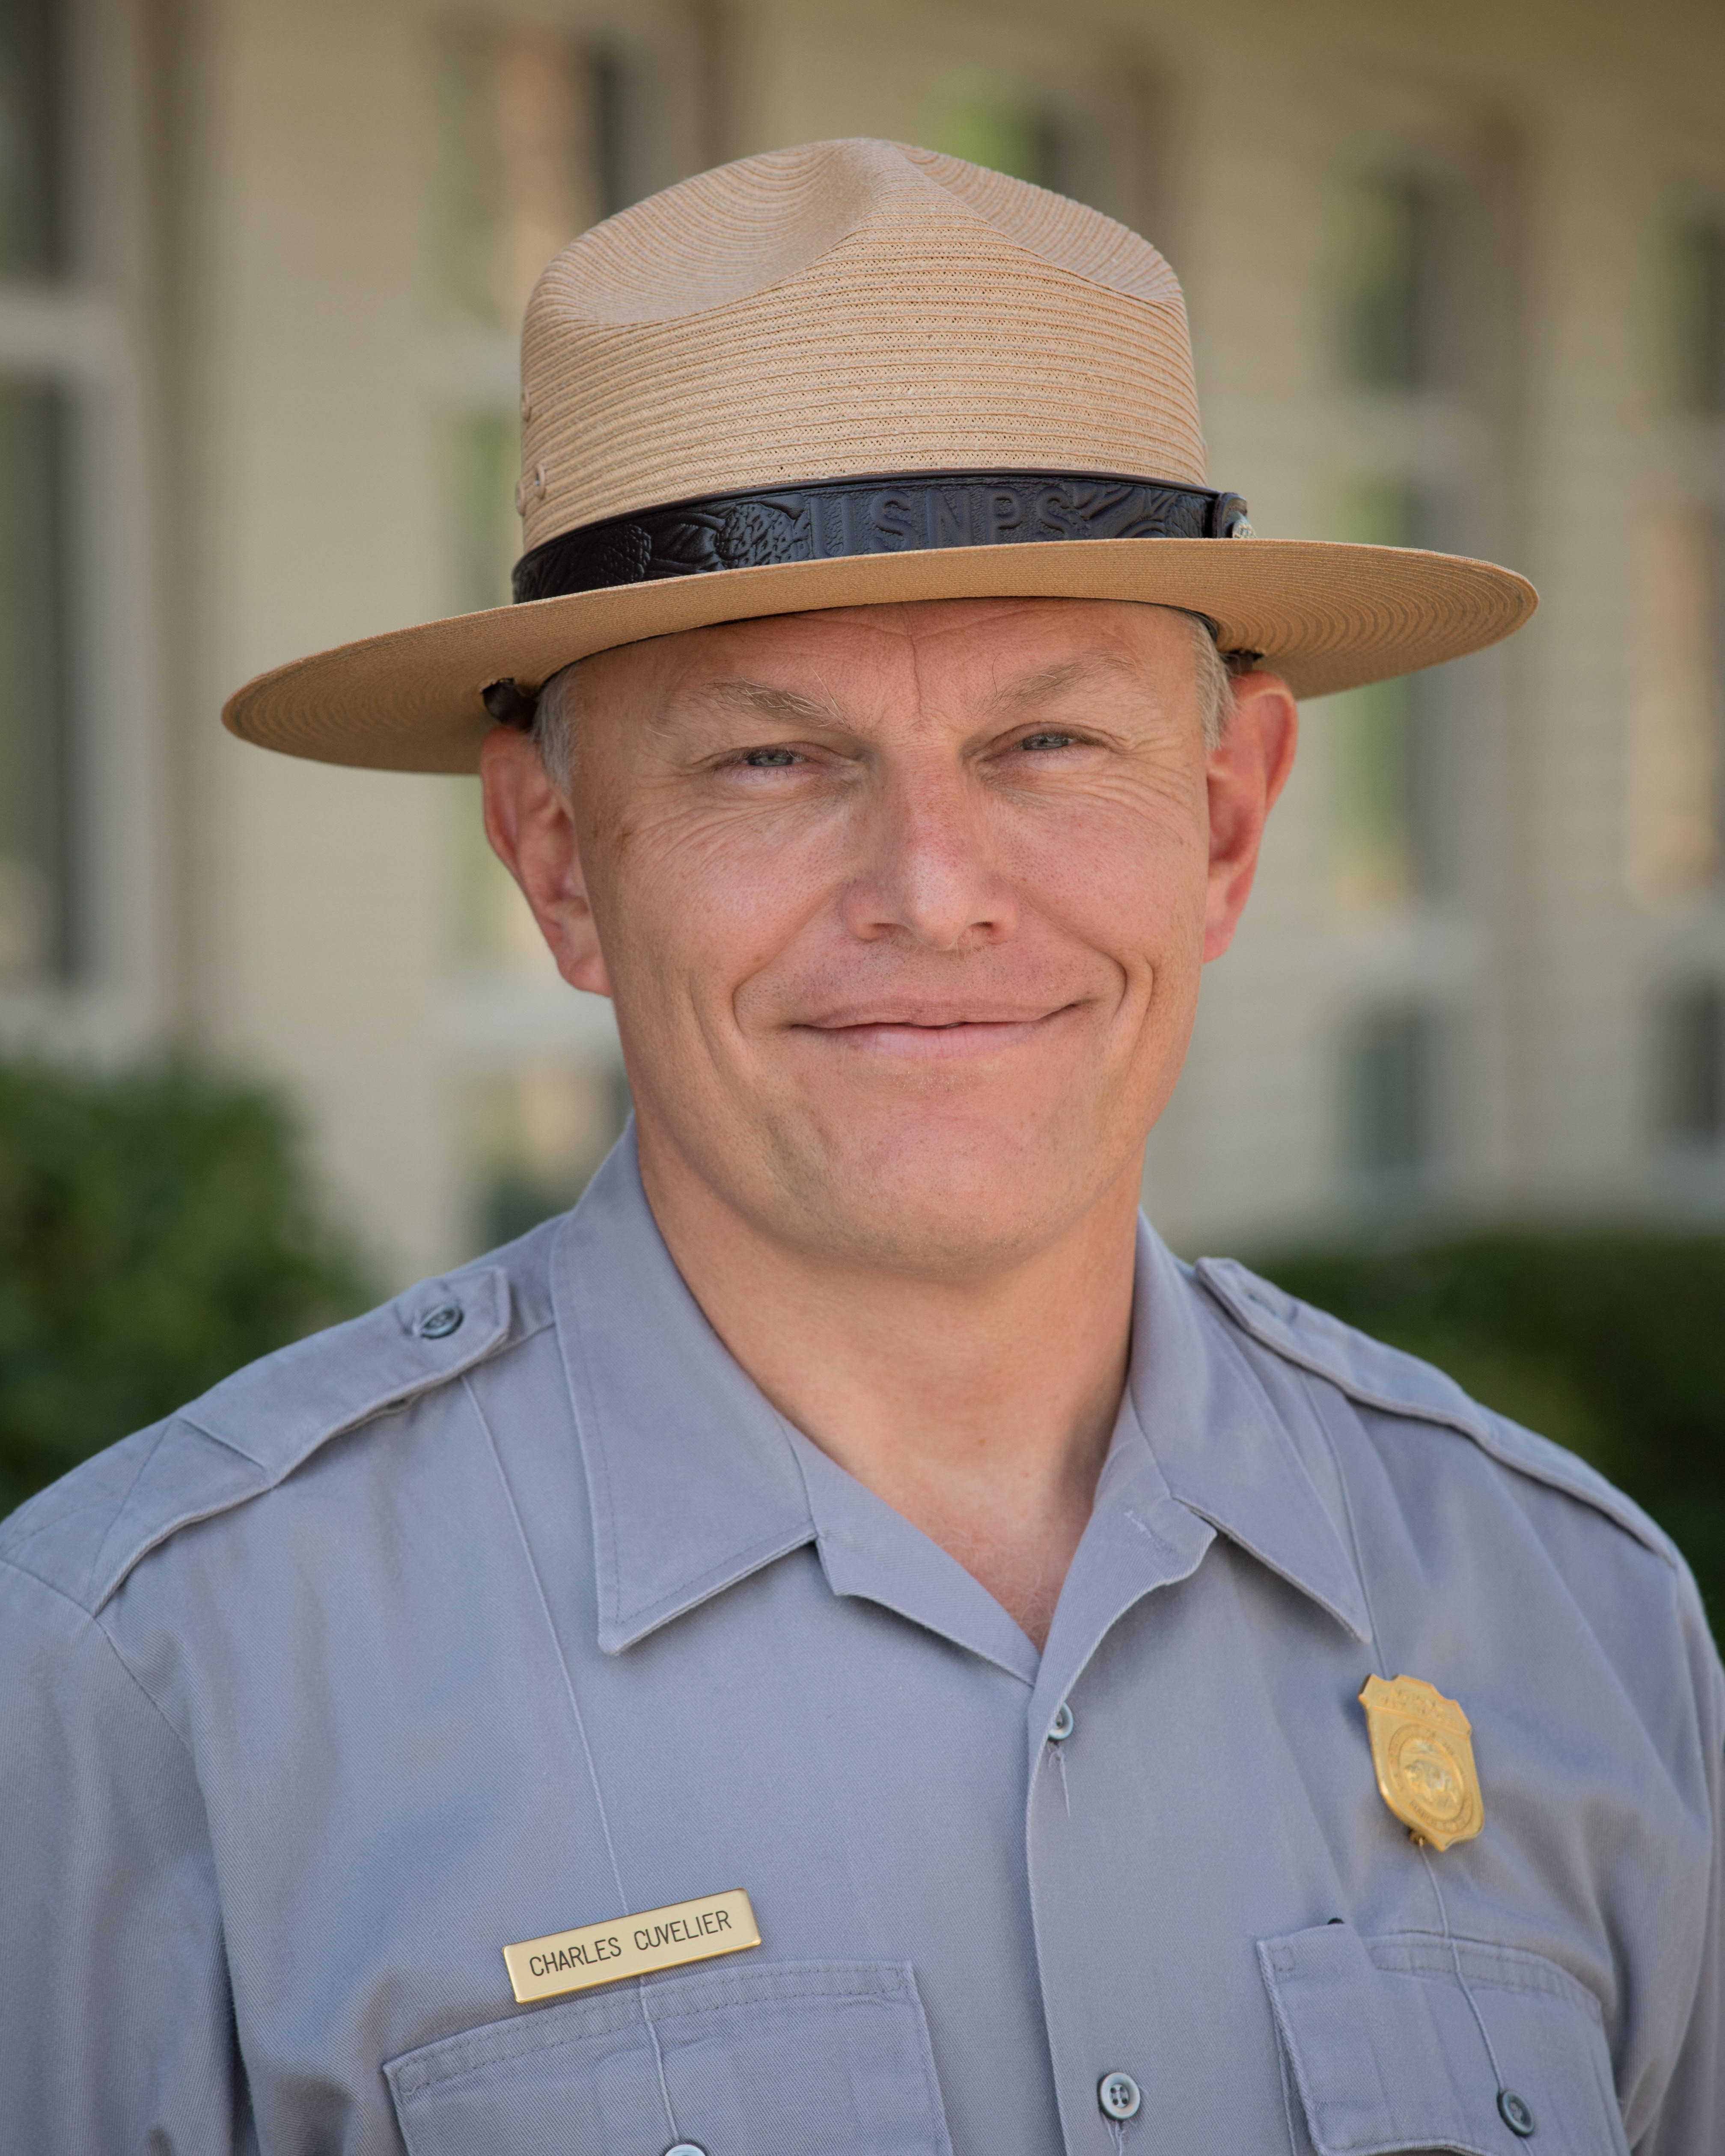 Image of Charles Cuvelier wearing a NPS uniform.